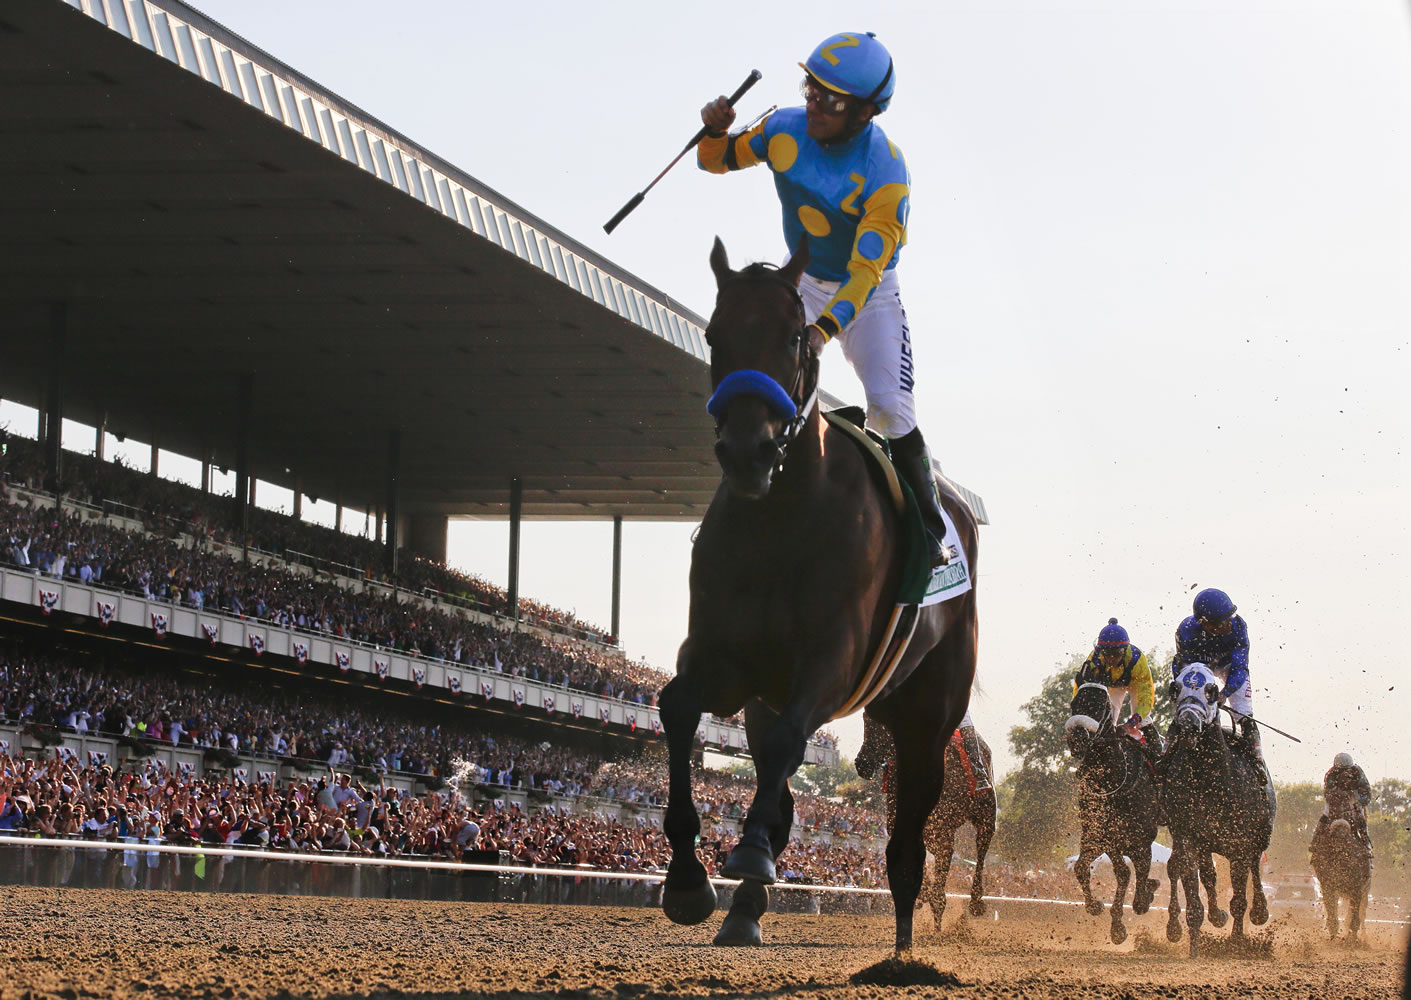 Victor Espinoza reacts after crossing the finish line with American Pharoah to win the Belmont Stakes on June 6, 2015, at Belmont Park in Elmont, N.Y. American Pharoahs sweep of the Kentucky Derby, Preakness and Belmont Stakes for horse racings first Triple Crown since 1978 was selected the sports story of the year Thursday, Dec. 24, 2015, in an annual vote conducted by The Associated Press.